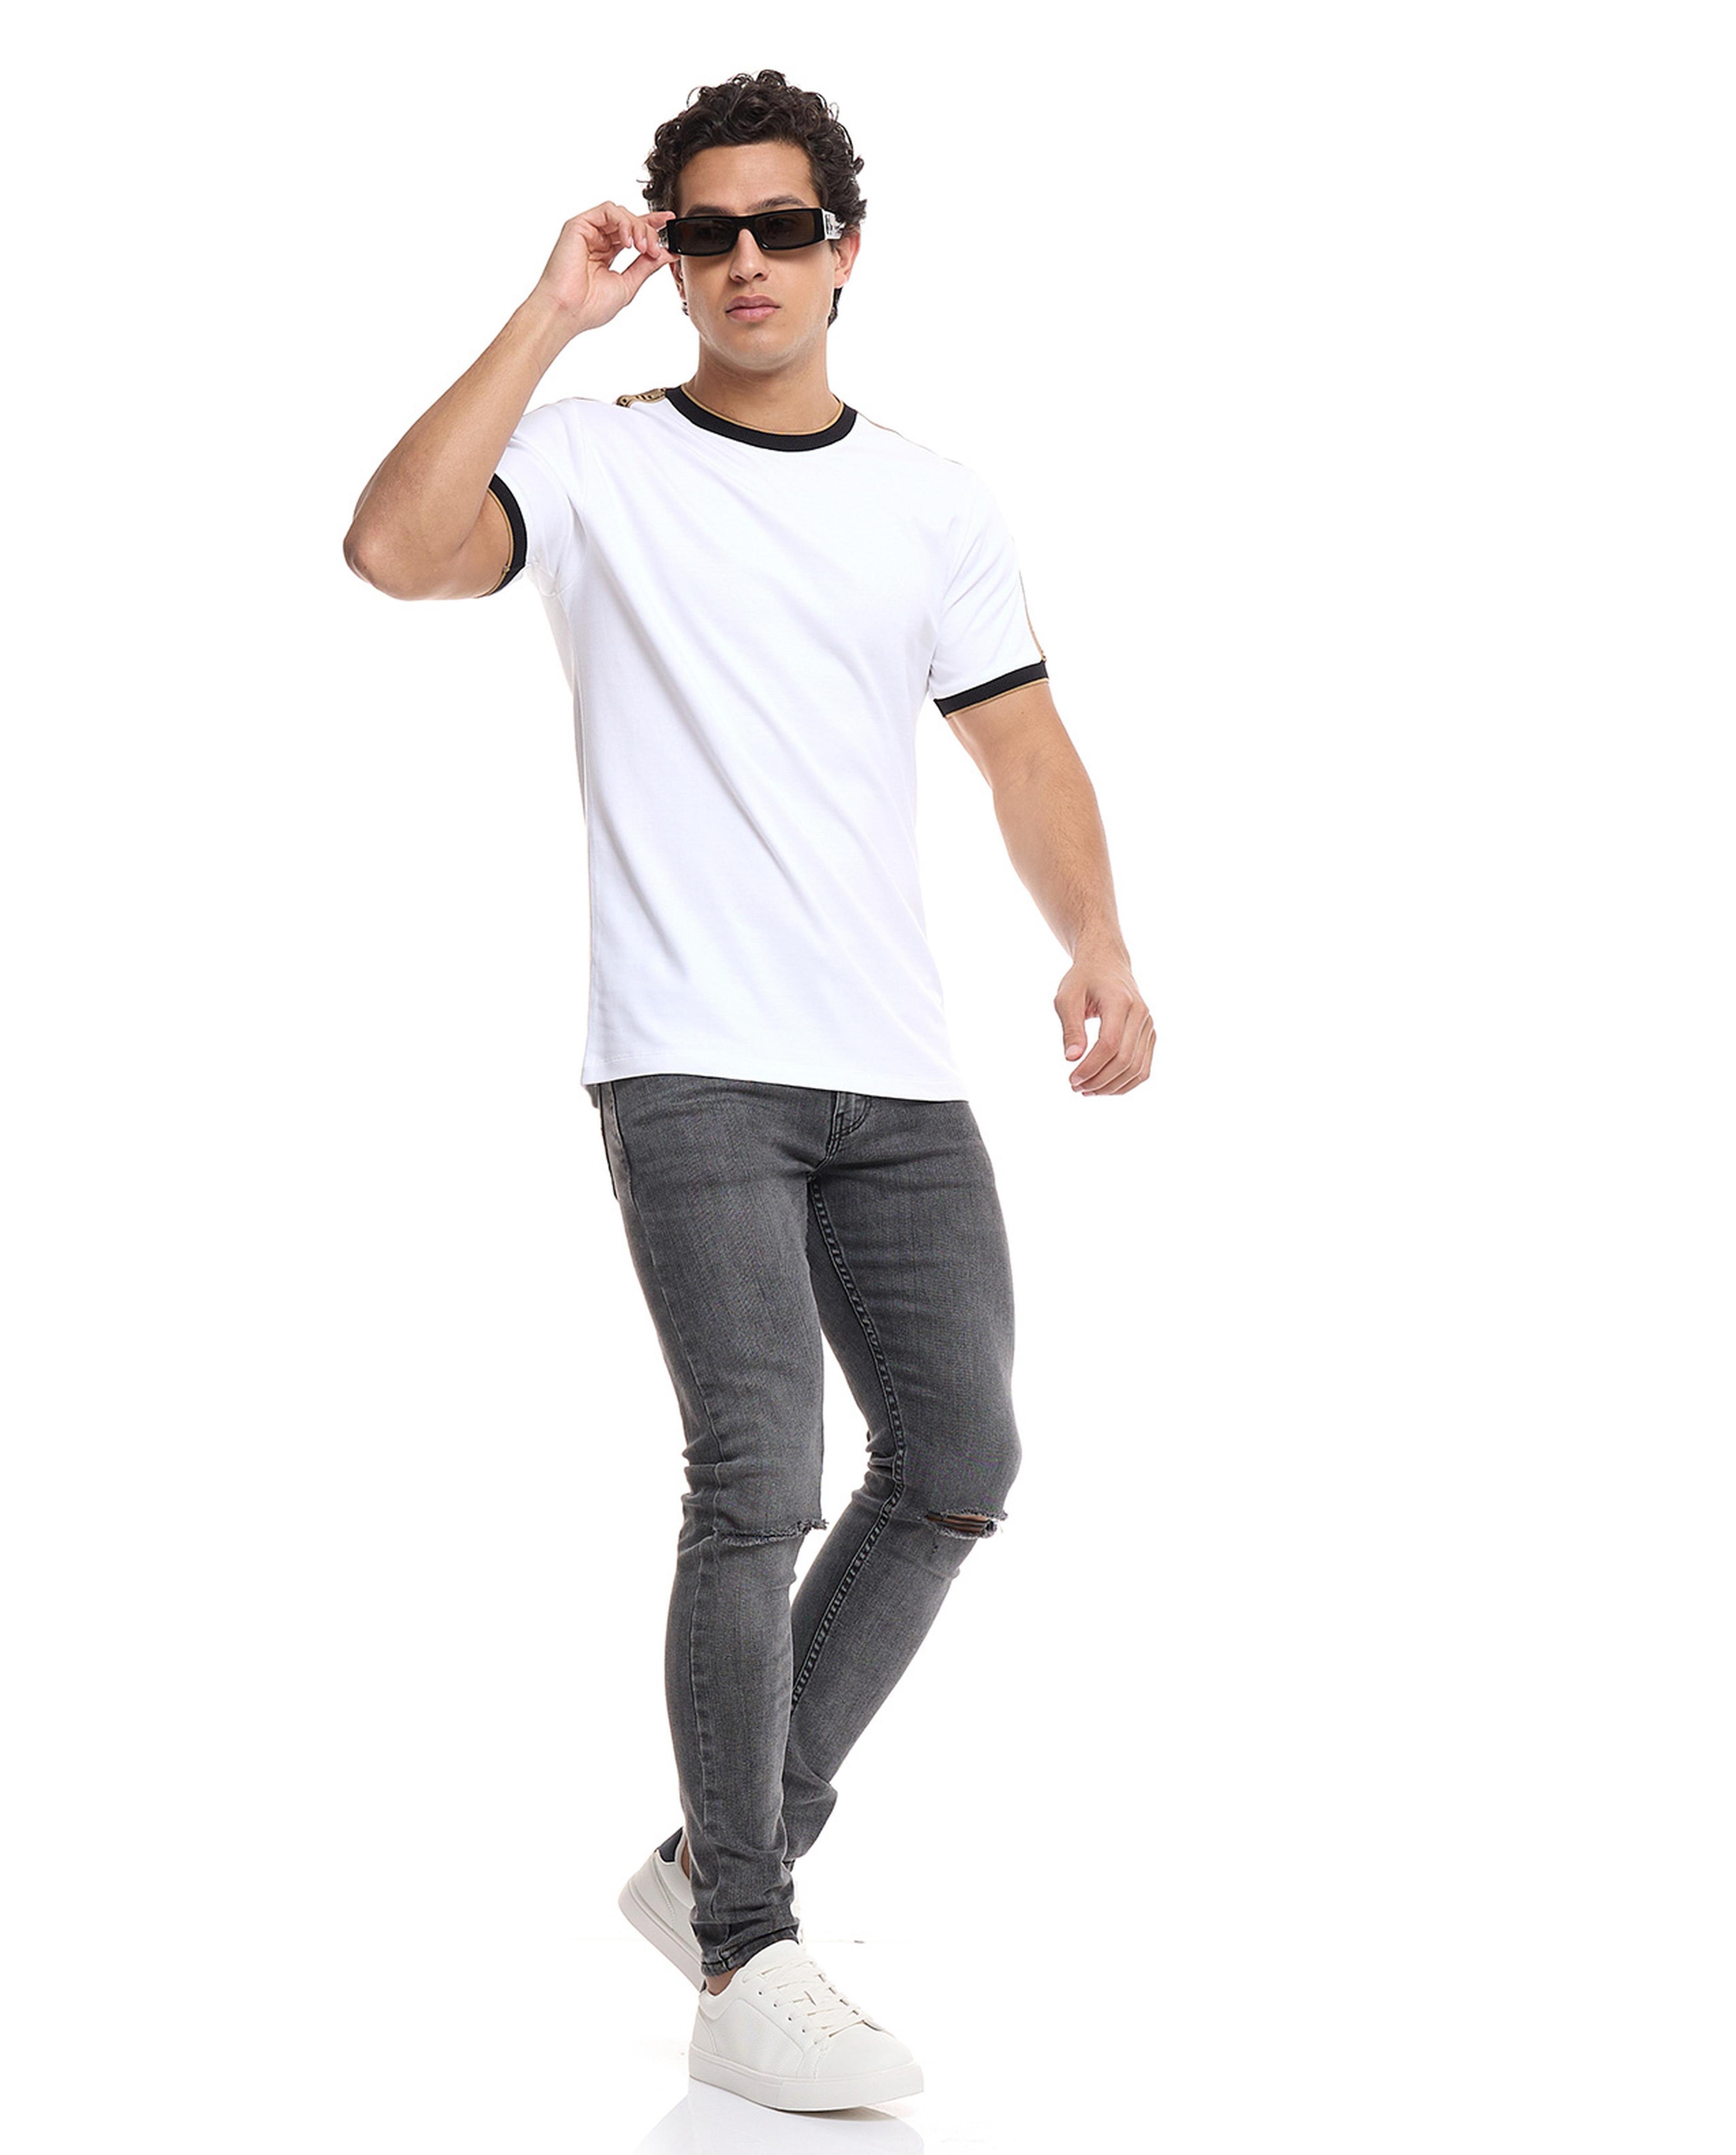 Contrast Tape T-Shirt with Crew Neck and Short Sleeves